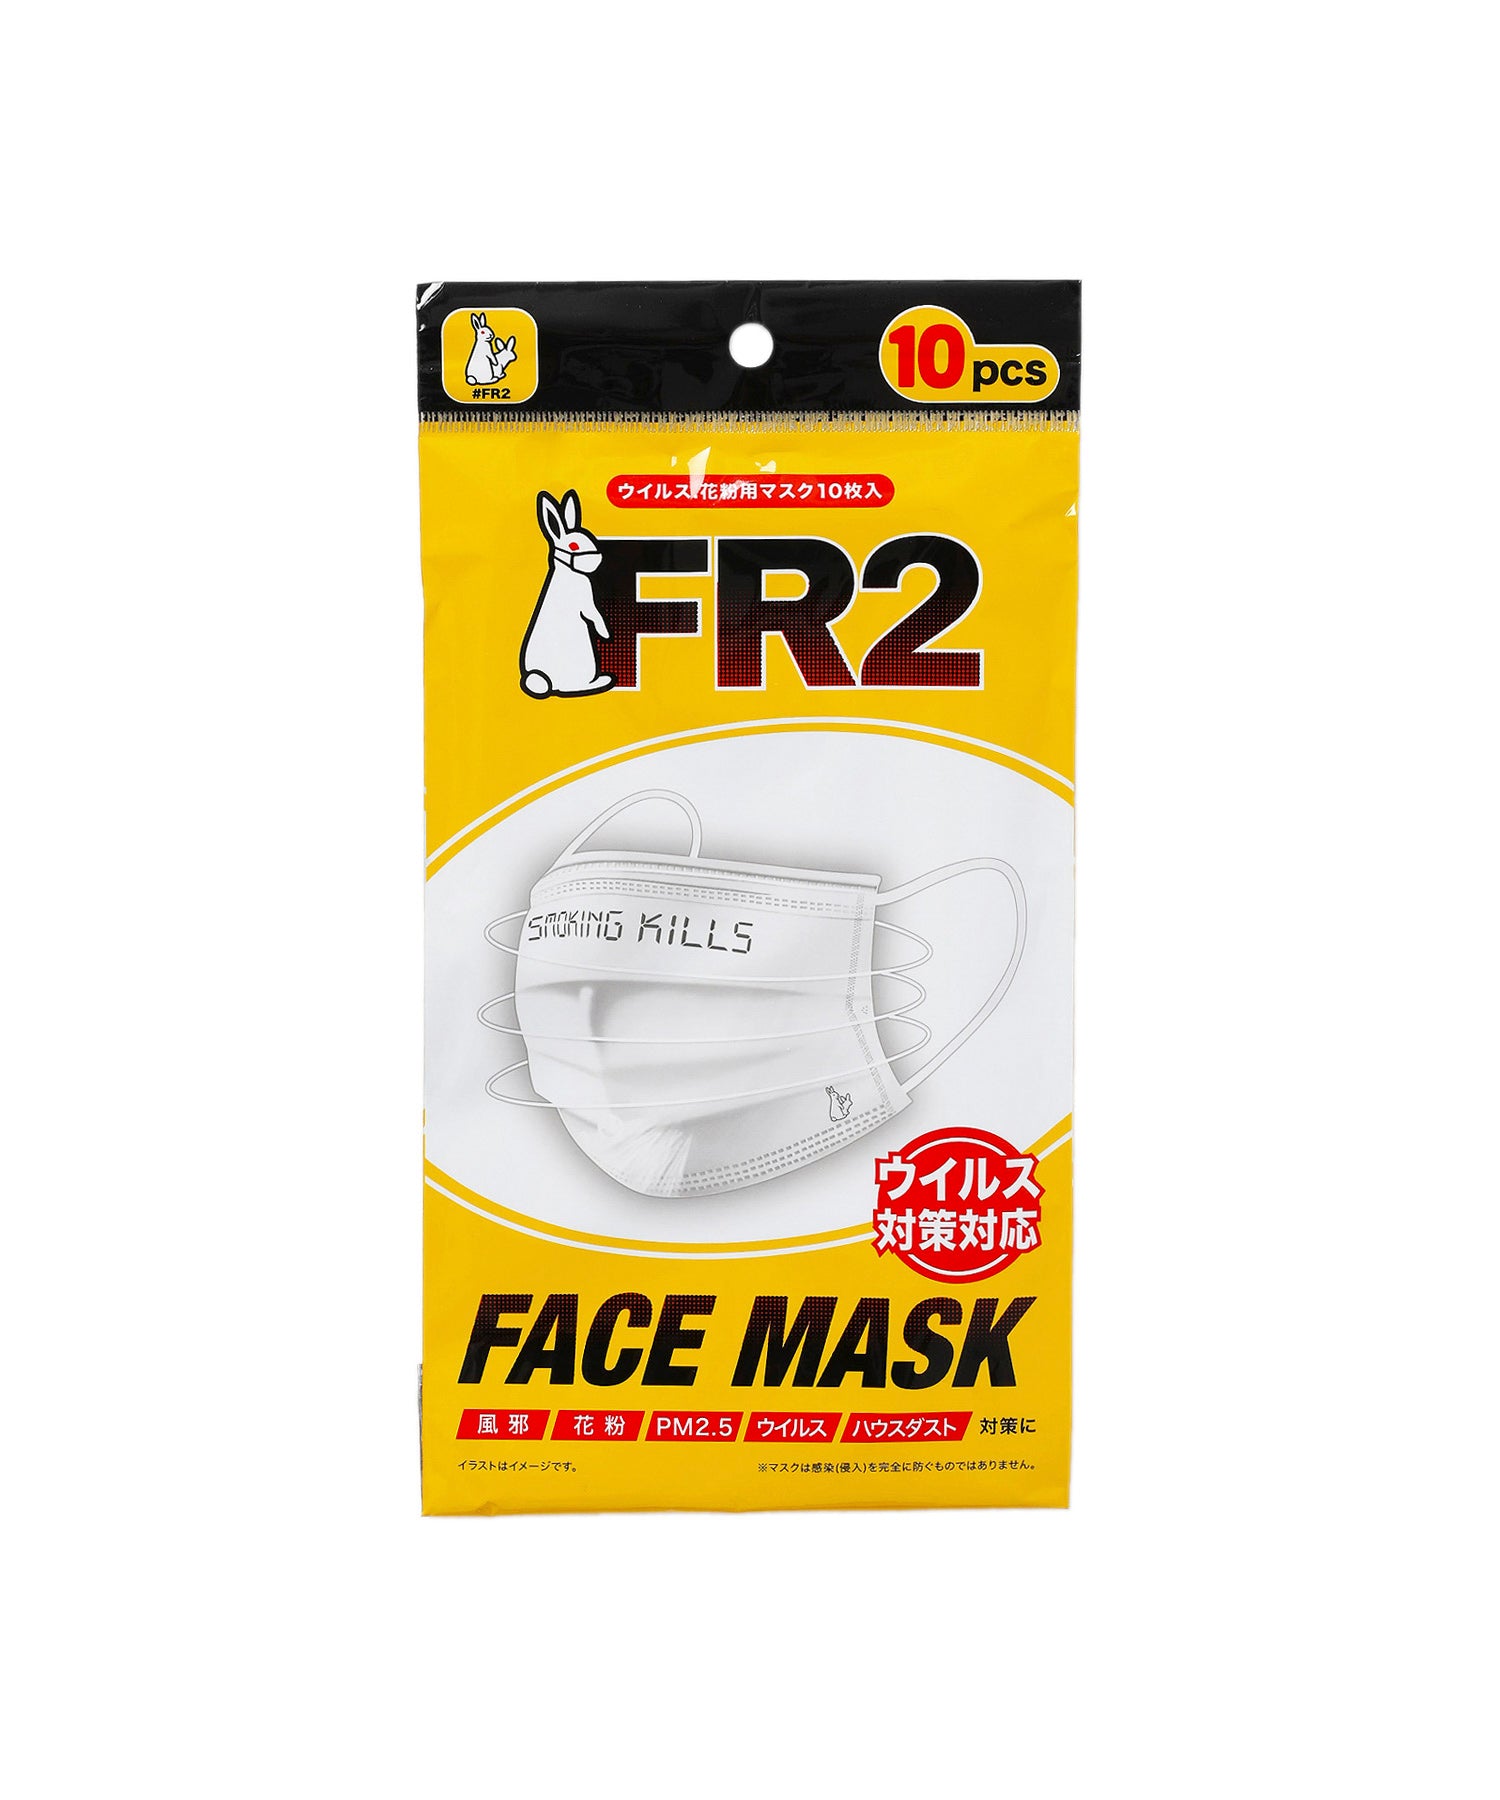 Pleated FACE MASK(10 pieces set) – #FR2